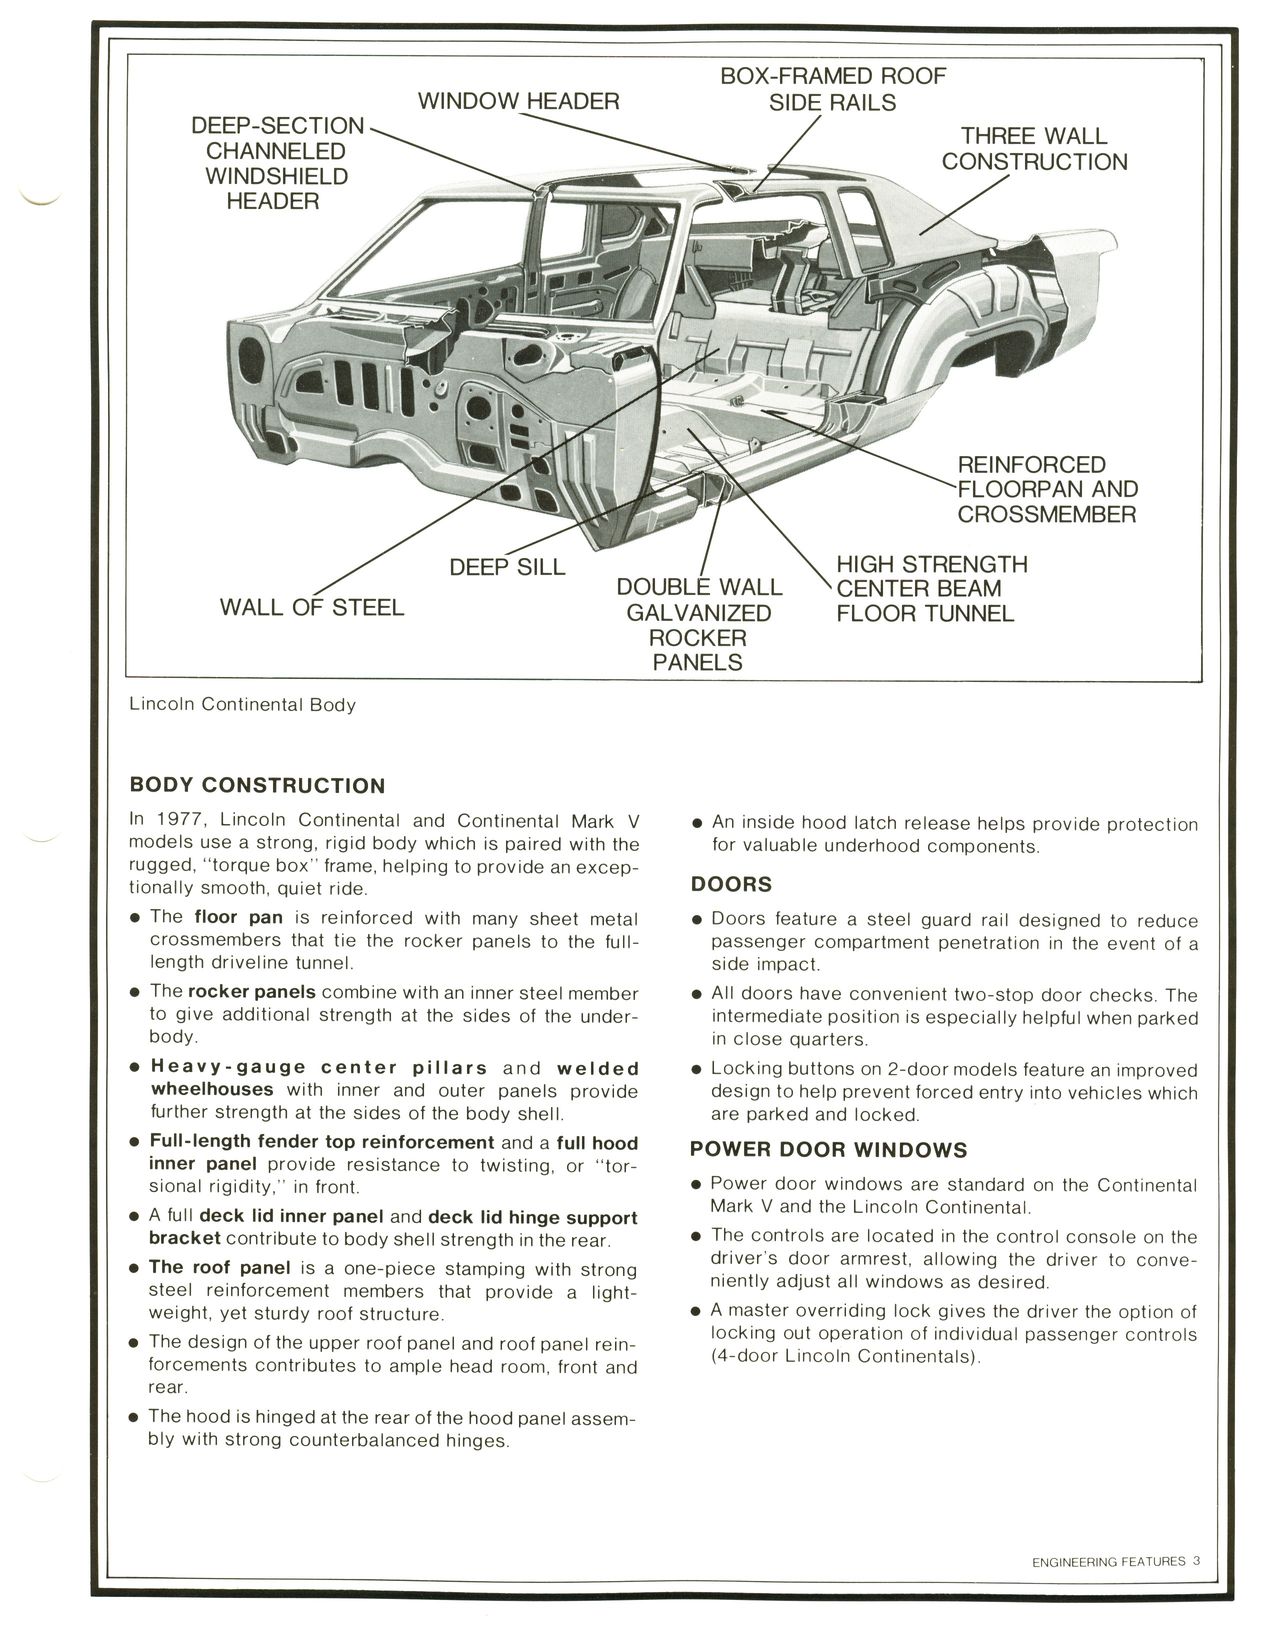 1977_Continental_Product_Facts_Book-3-03